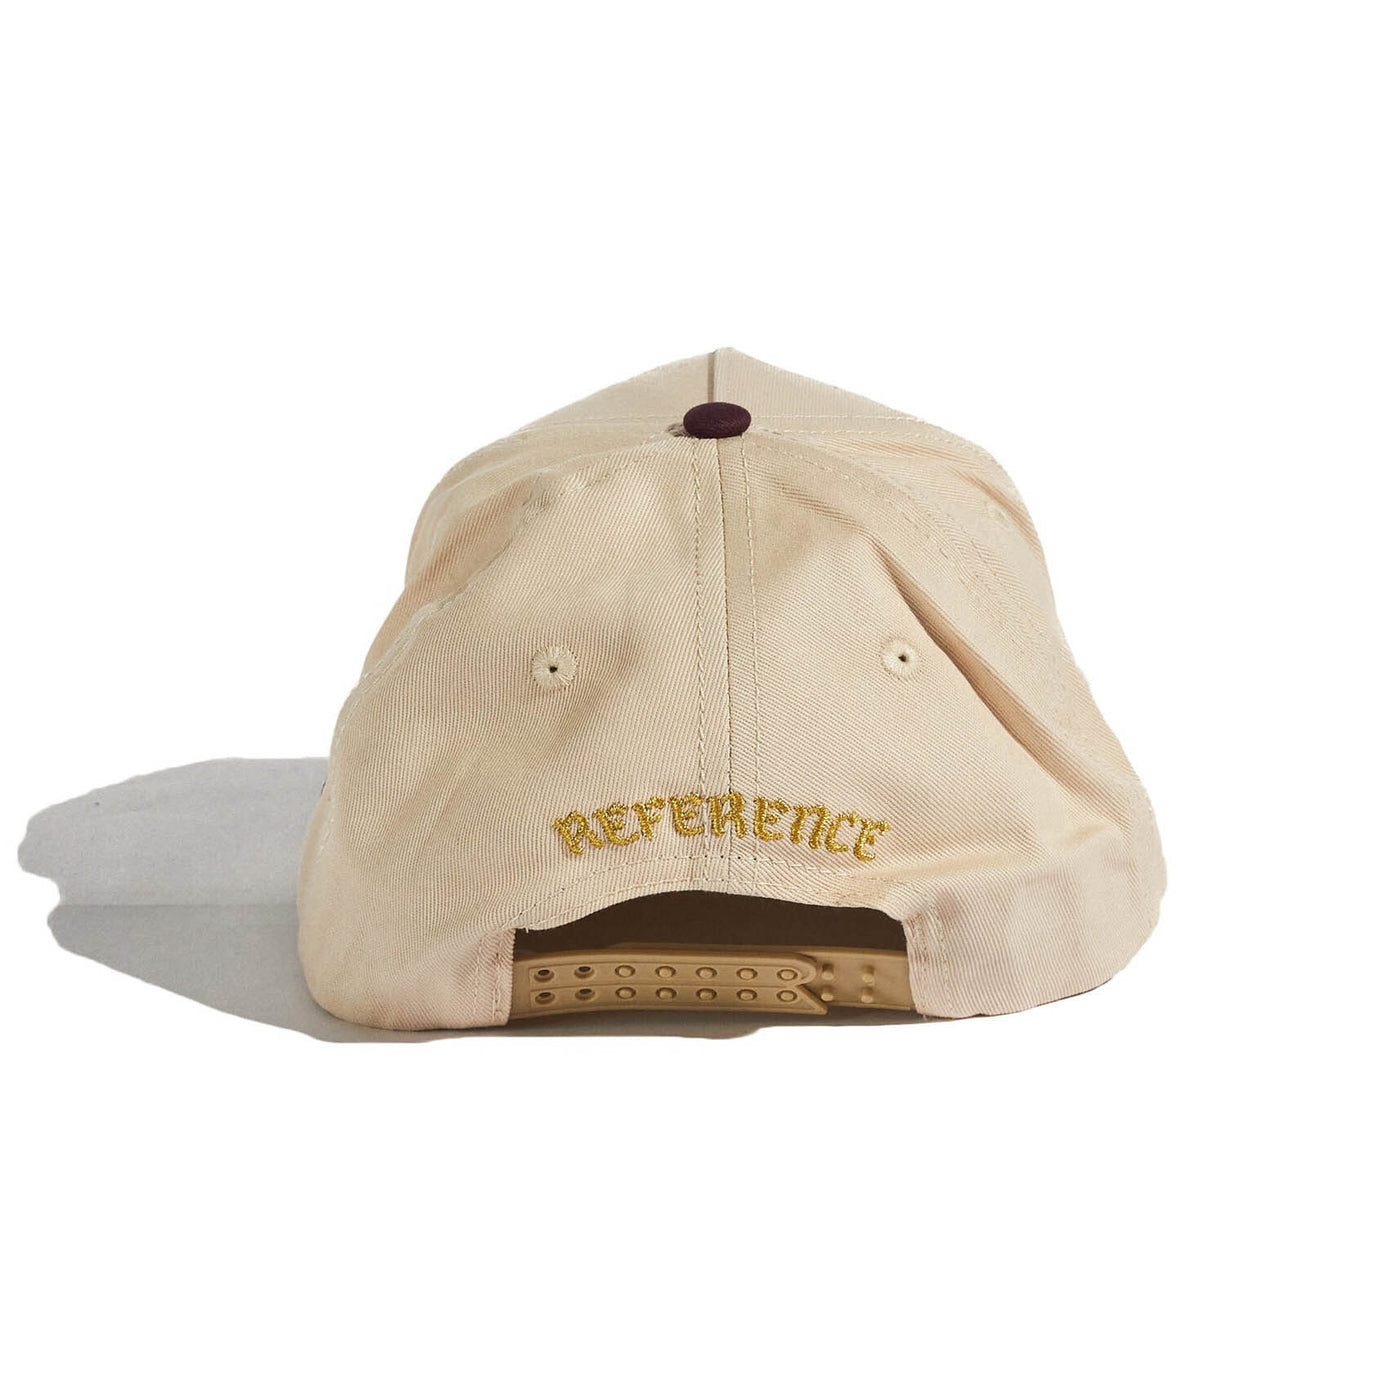 REFERENCE HORNTHERS HAT CREAM/PURPLE